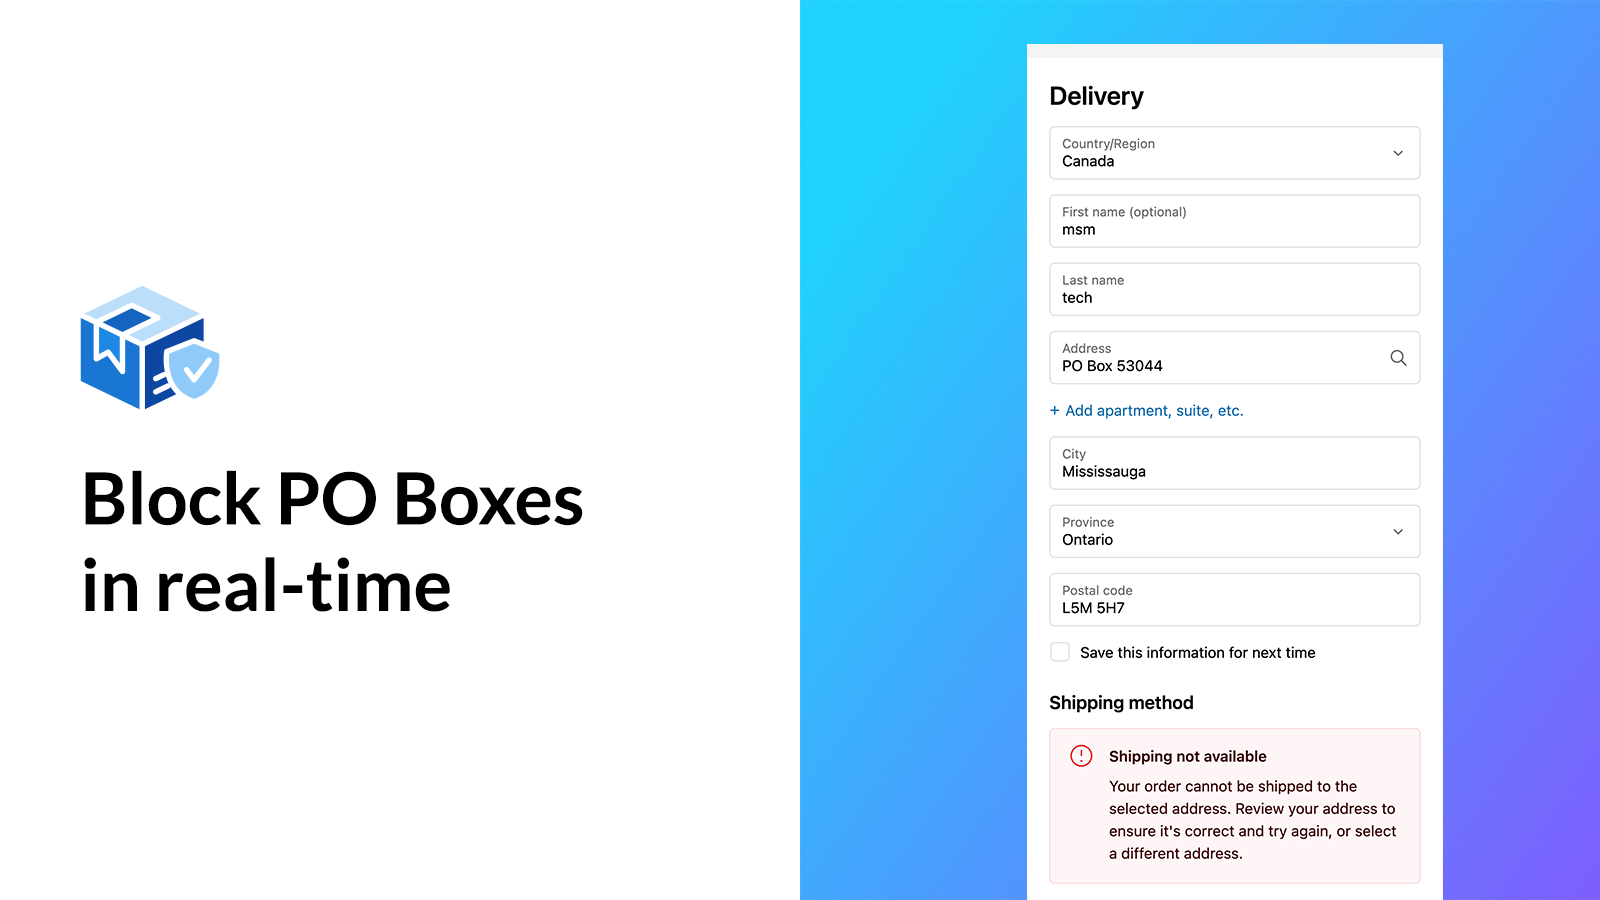 Block PO Boxes in real-time